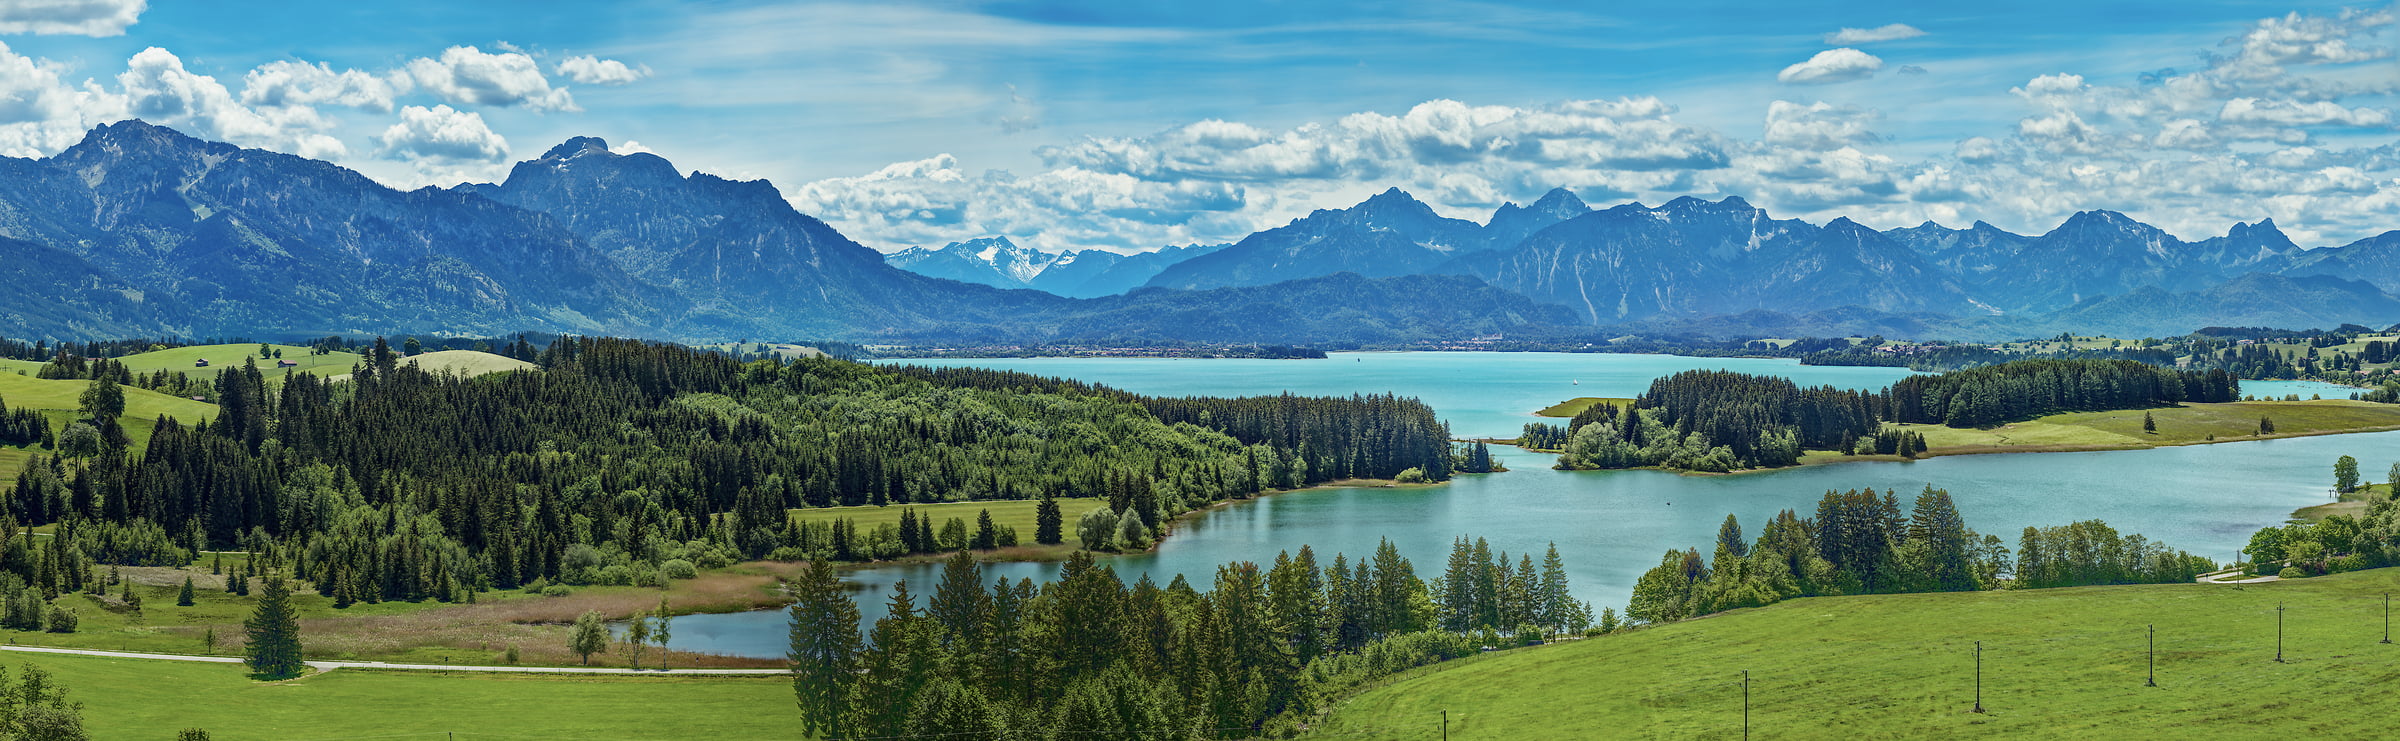 2,255 megapixels! A very high resolution, large-format VAST photo print of a Germany landscape with lakes, mountains, and a beautiful sky; photograph created by Alfred Feil at Ilas Mountain Lake, Allgaeu Alps, Bavaria, Germany.